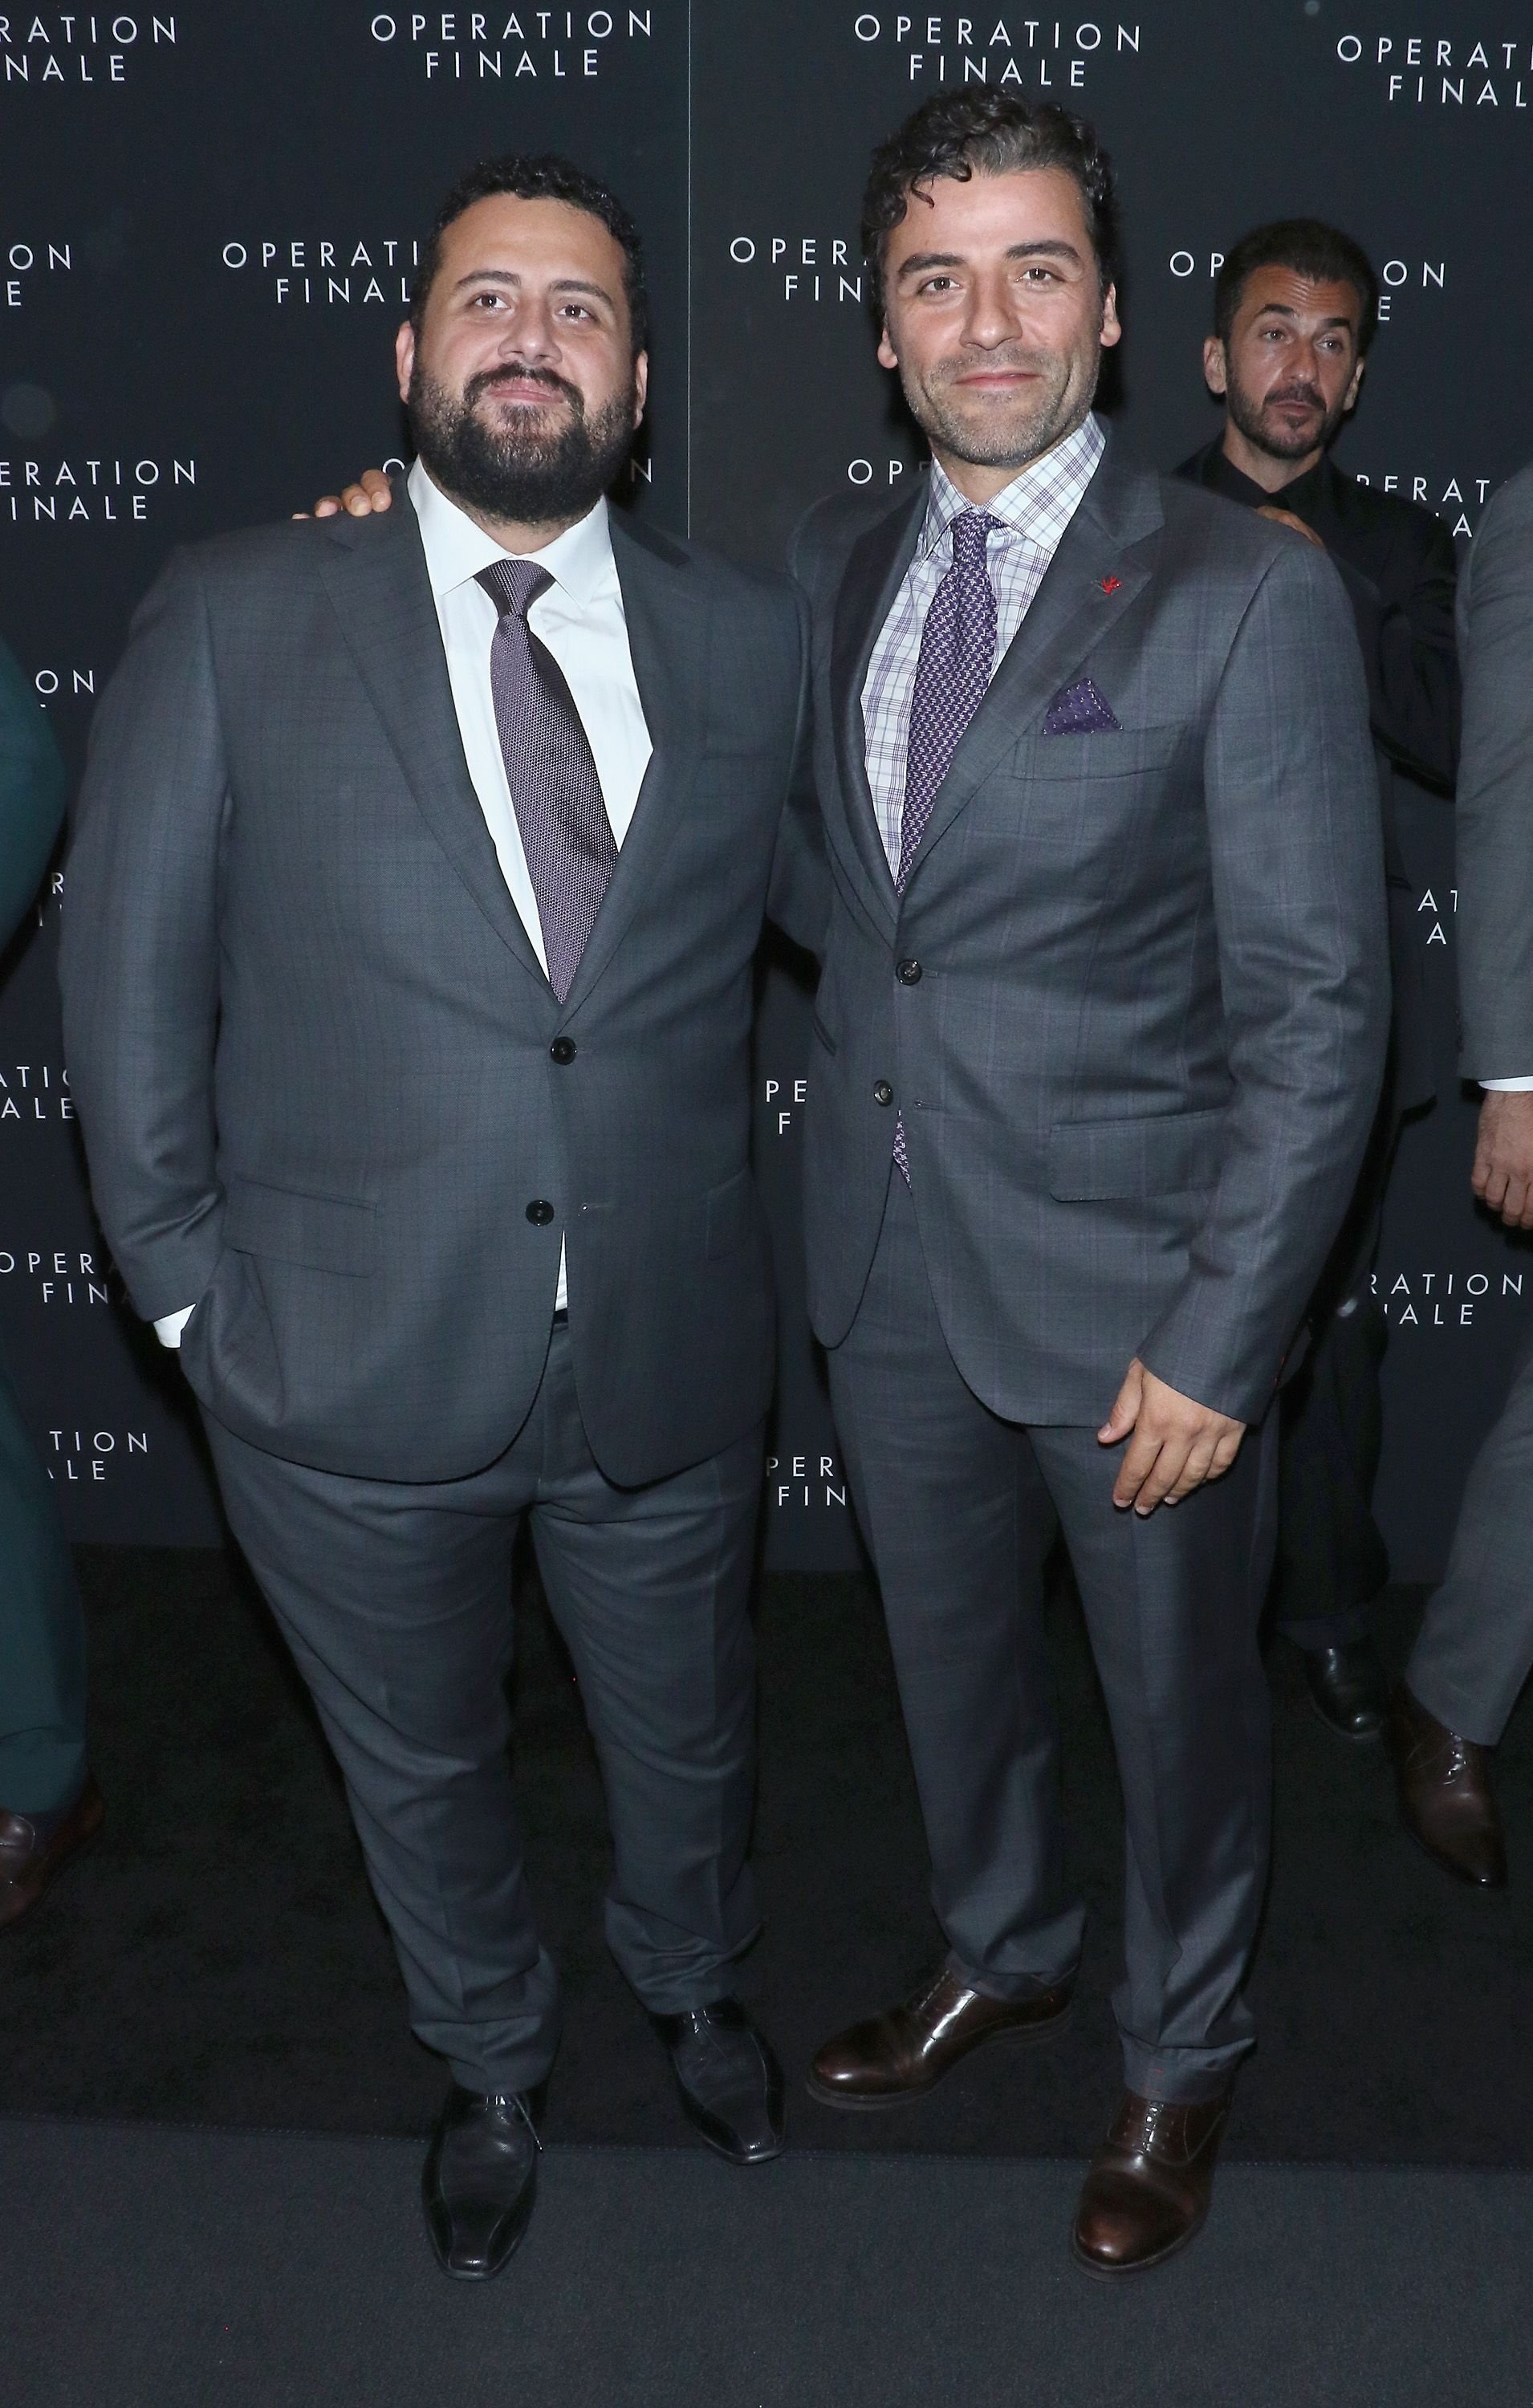 Michael Benjamin Hernandez and Oscar Isaac during the "Operation Finale" New York premiere at Walter Reade Theater on August 16, 2018 in New York City. | Source: Getty Images